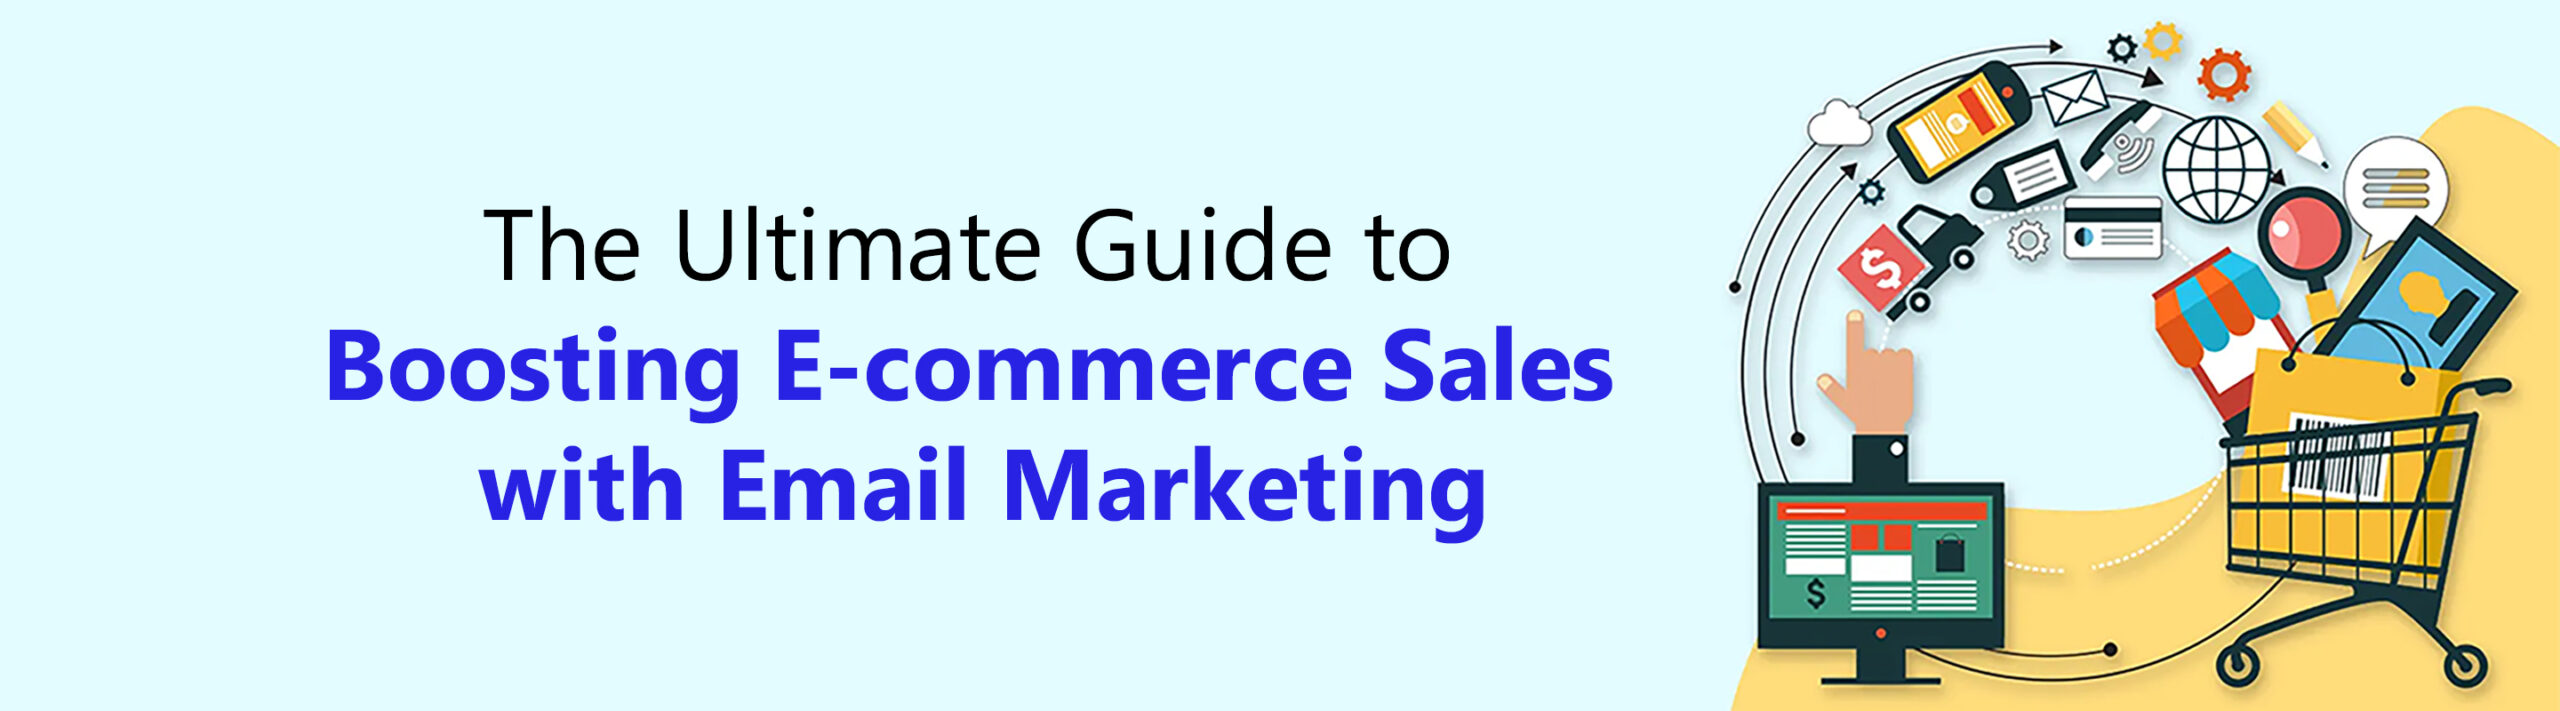 THE ULTIMATE GUIDE TO BOOSTING ECOMMERCE SALES WITH EMAIL MARKETING